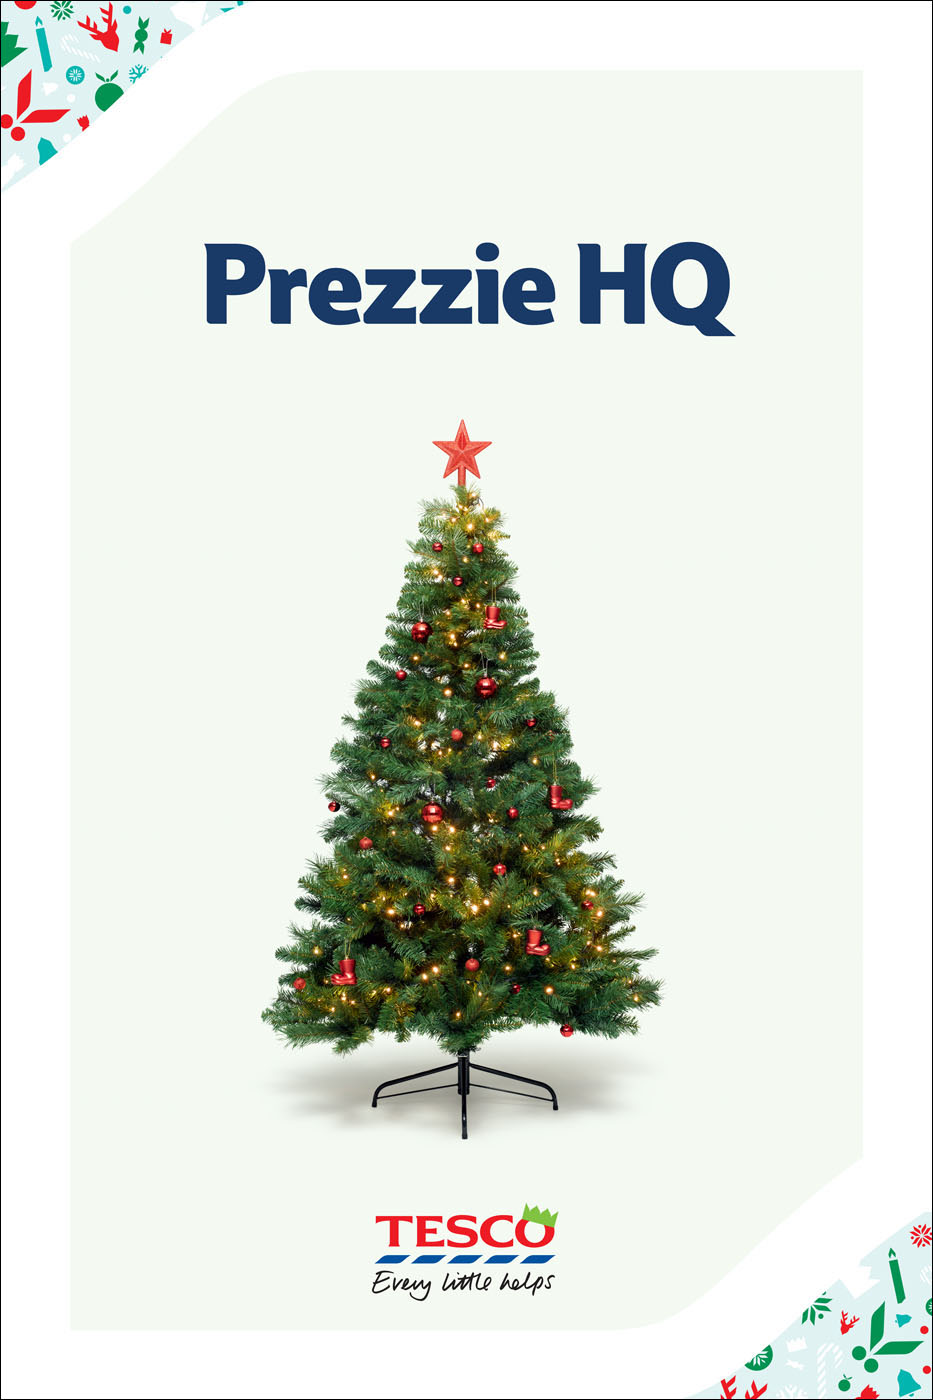 Christmas tree from Tesco by Alexander Kent London based still life and product photographer.